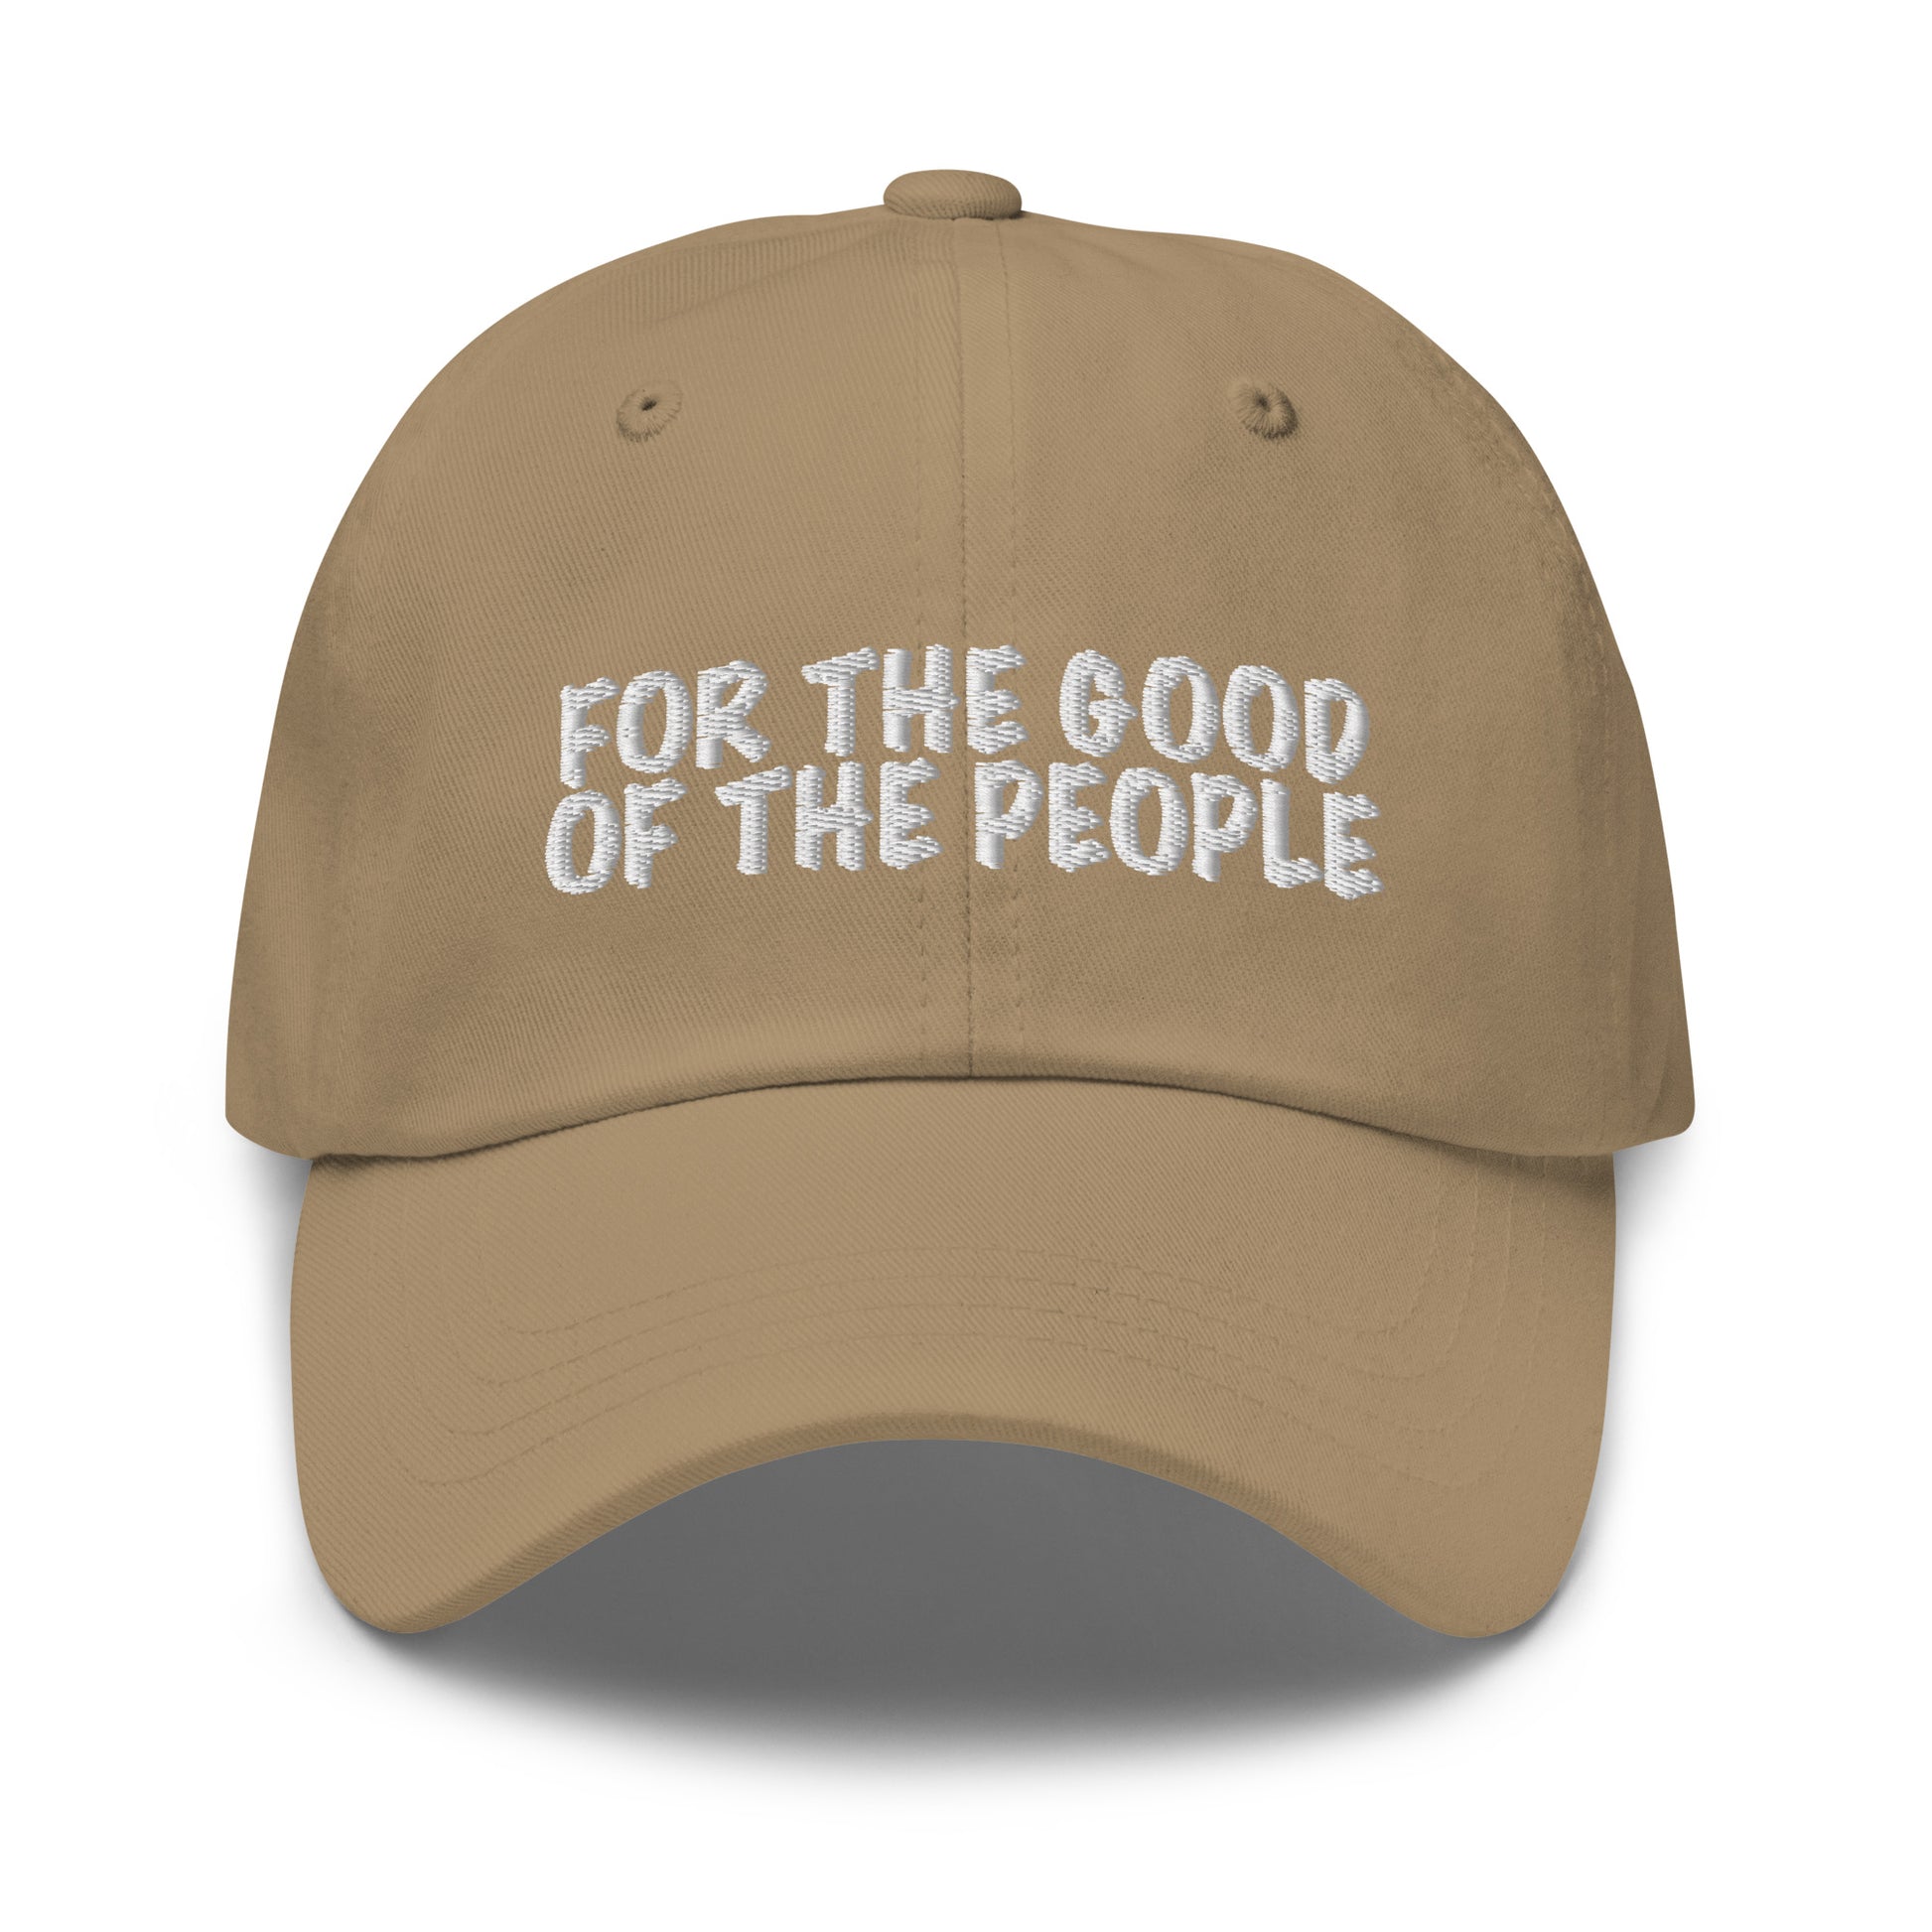 For the good of the people embroidered in white on front of khaki dad hat.